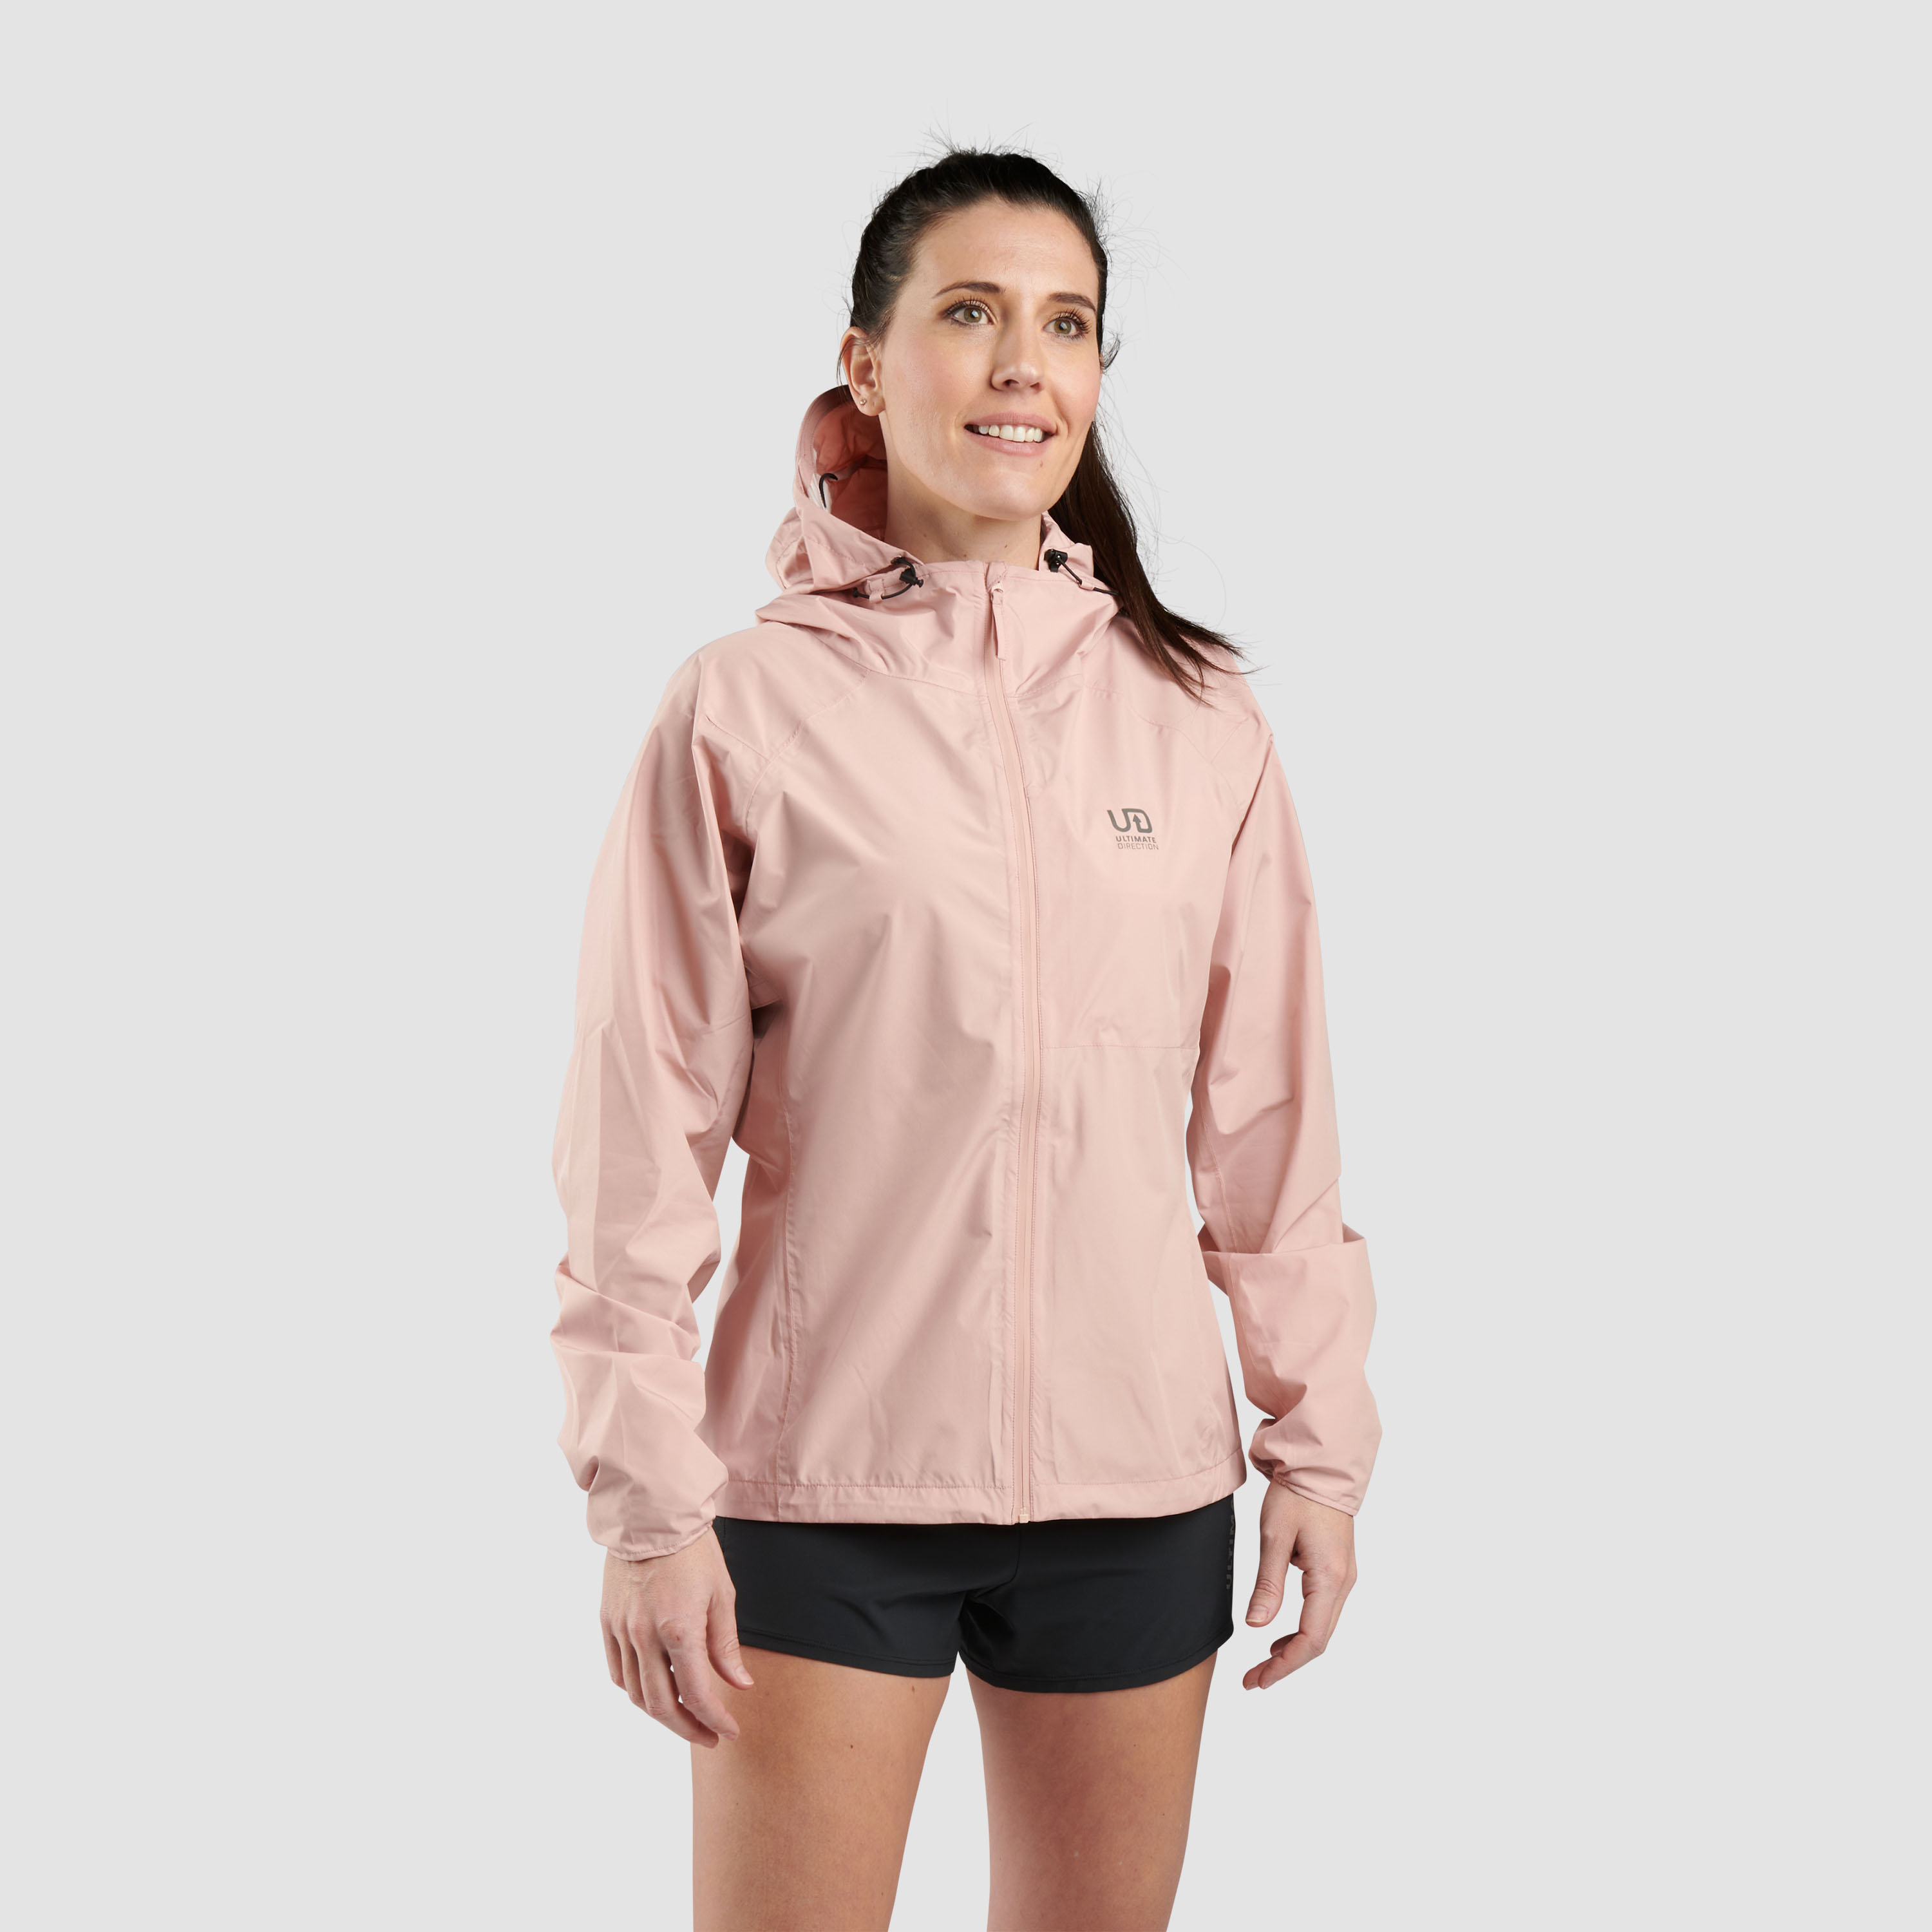 Ultimate Direction Women's Deluge Jacket in Clay Size XL